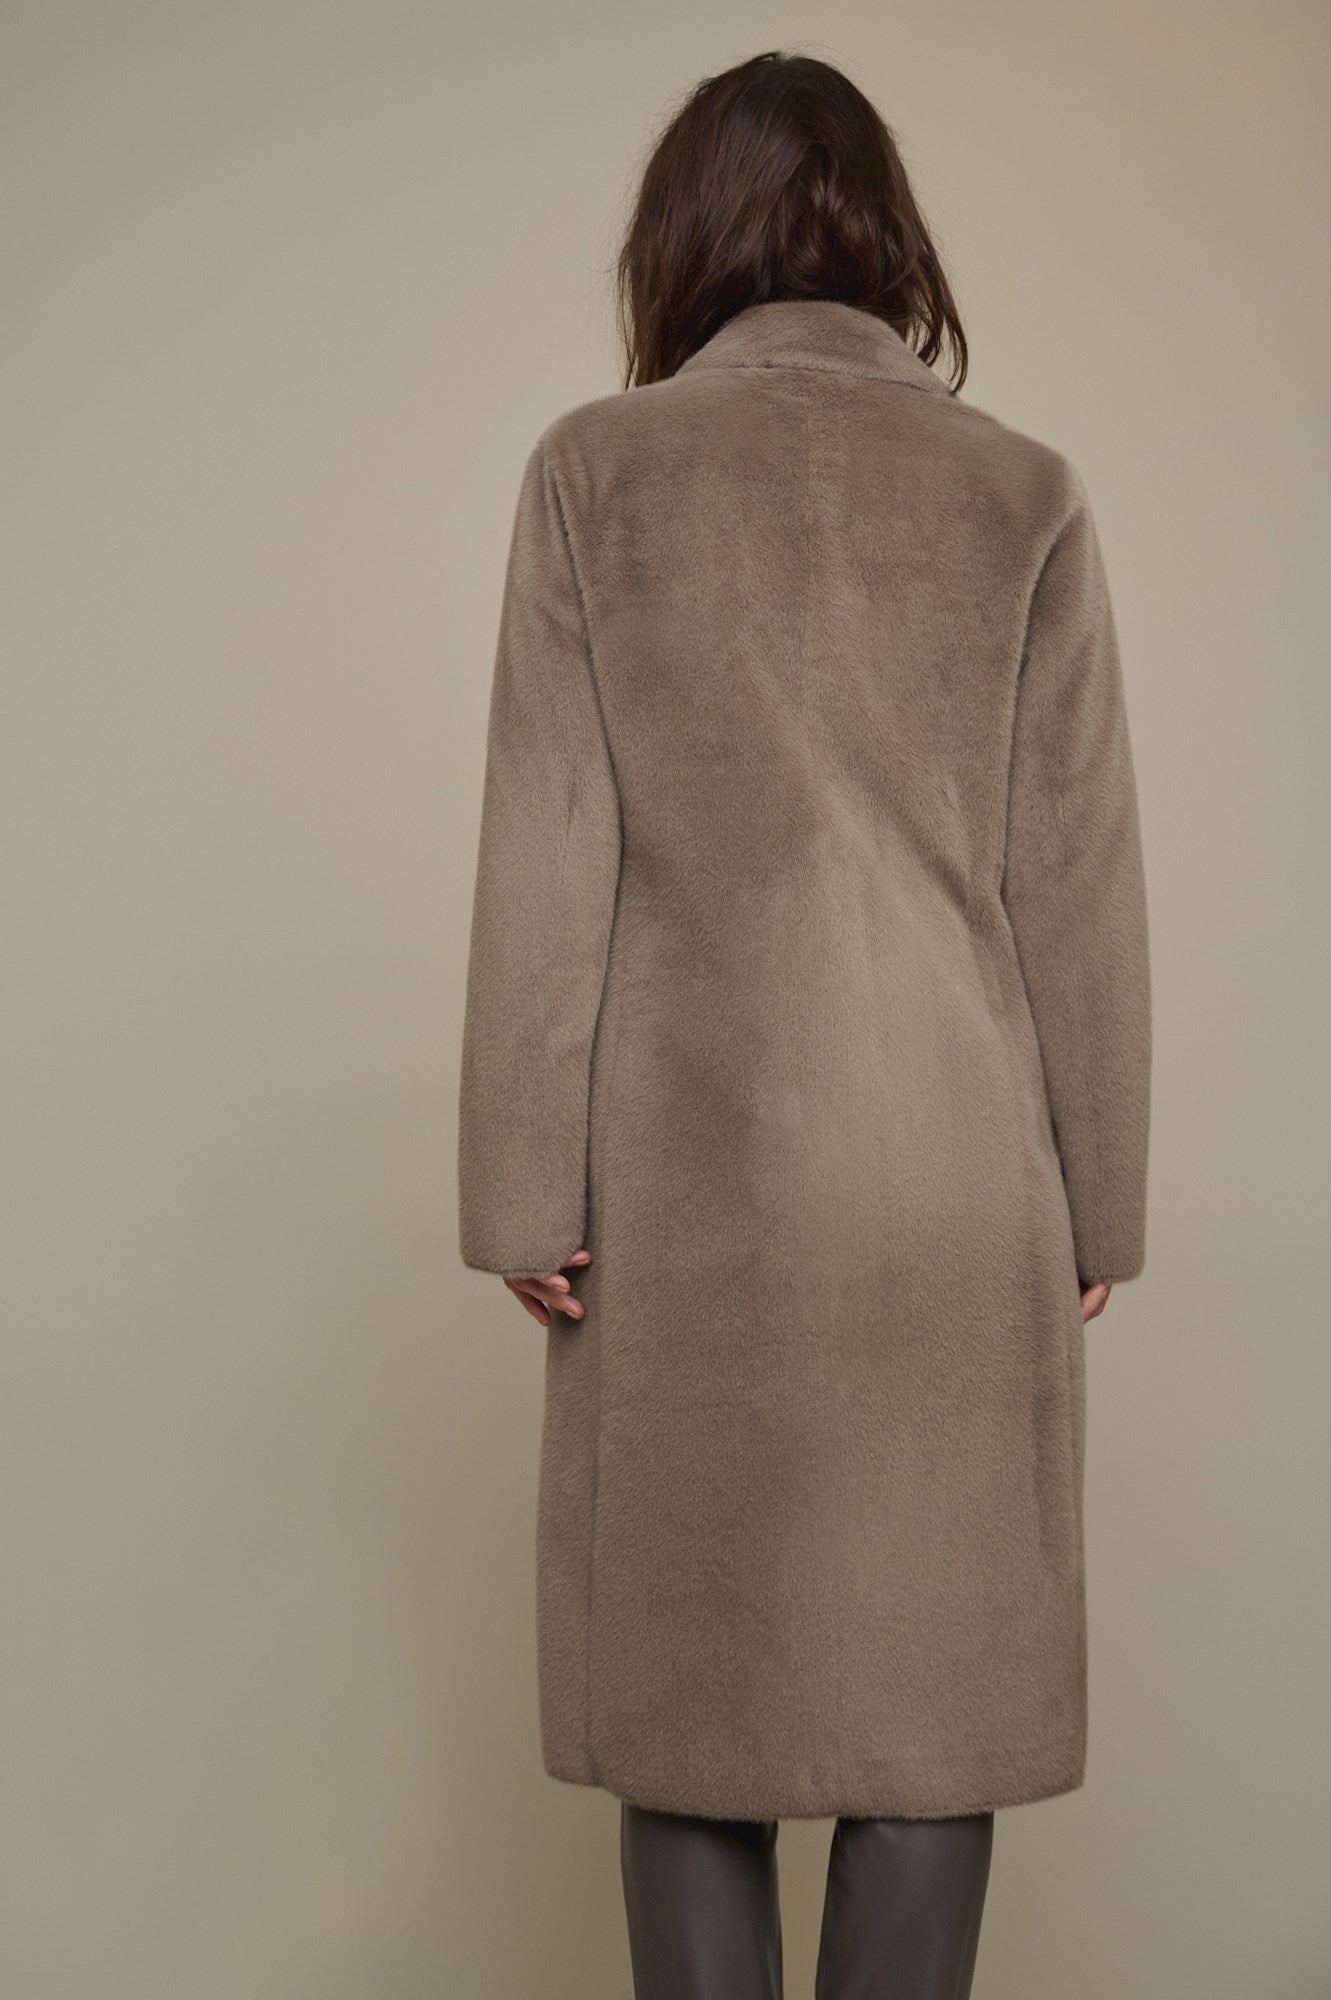 Rino & Pelle Long Single Breasted Taupe Coat